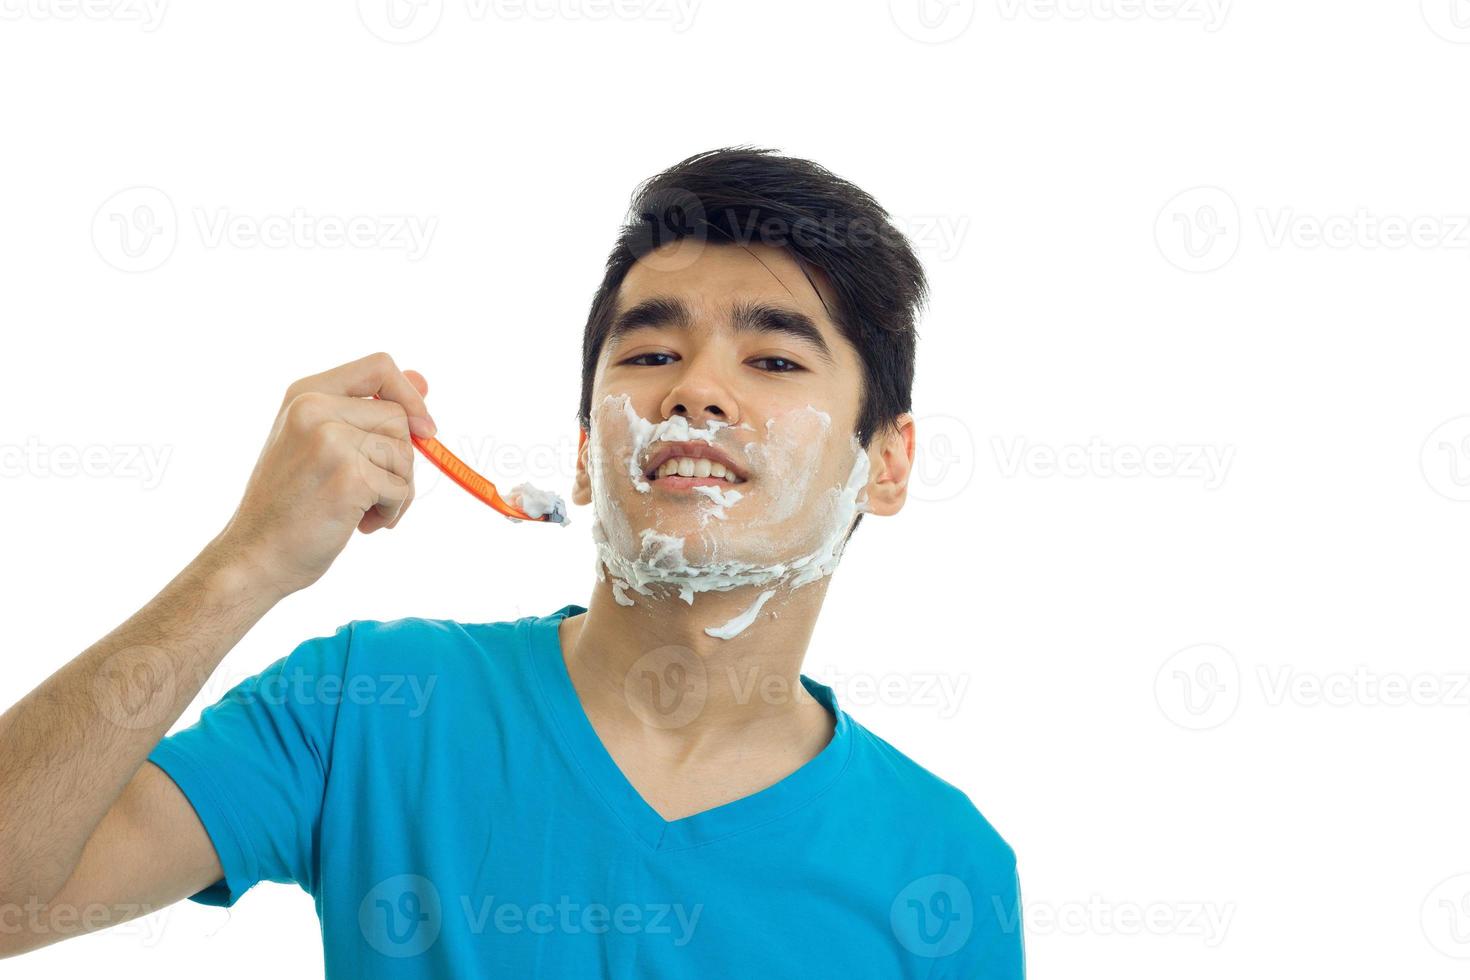 joyful young guy with black hair tilted his head back and looks right shaves photo